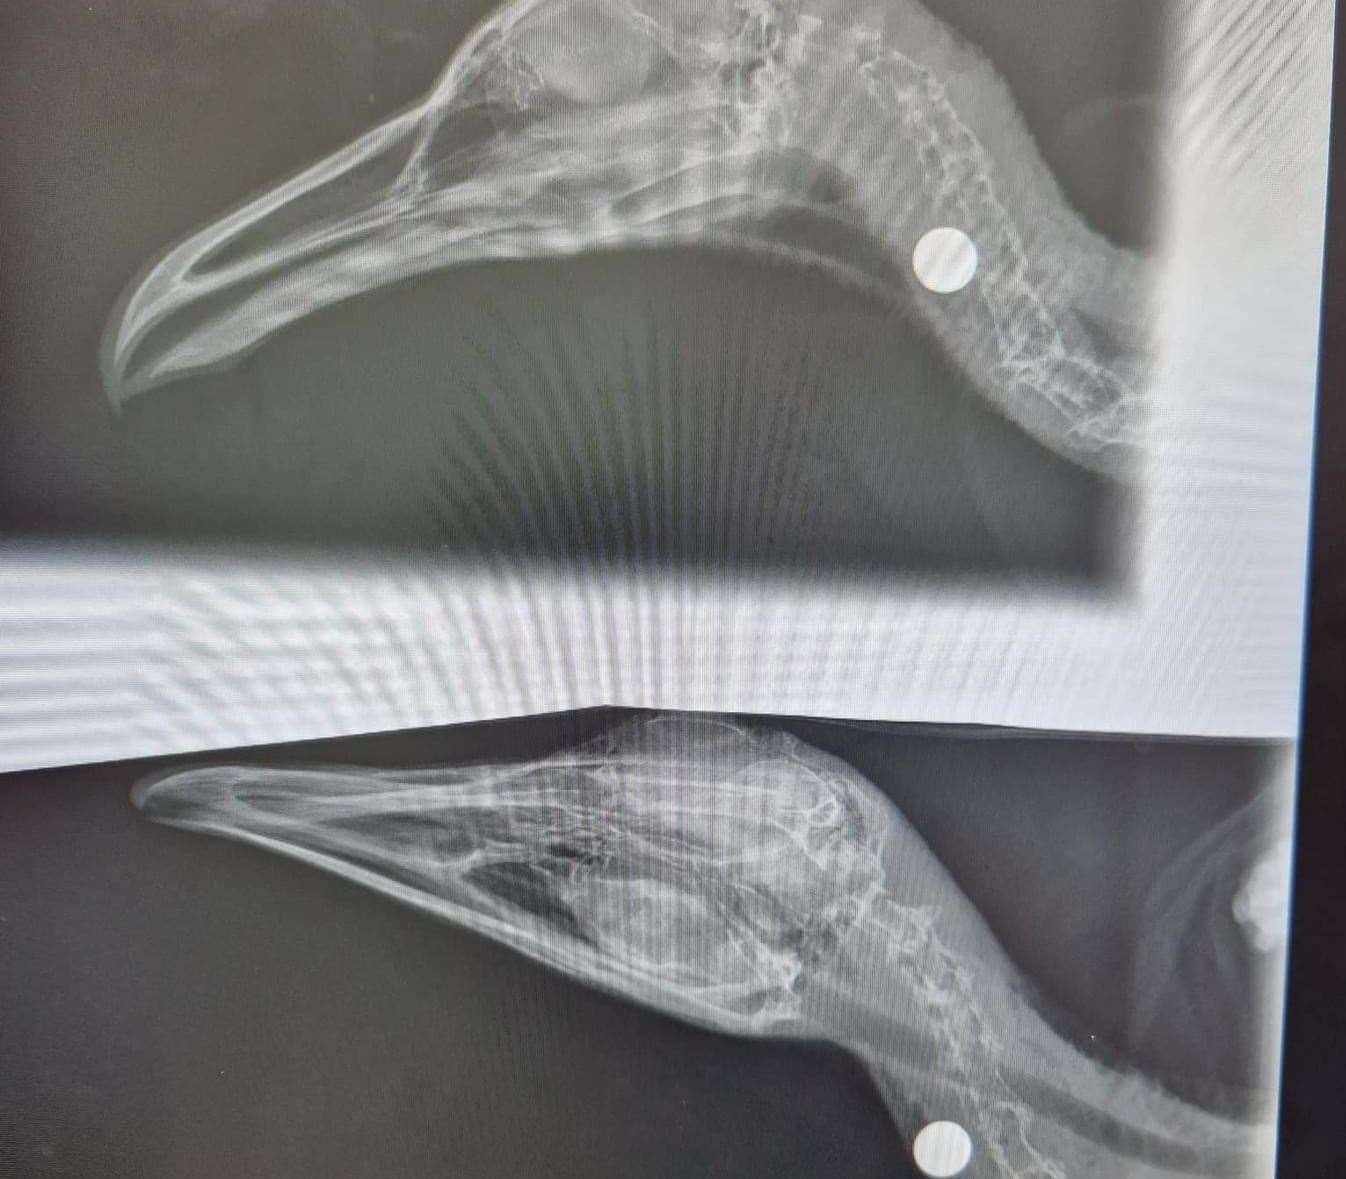 The ball bearing was found in the Faversham seagull's head on an X-ray at Swaleside vets. Picture: Serena Henderson